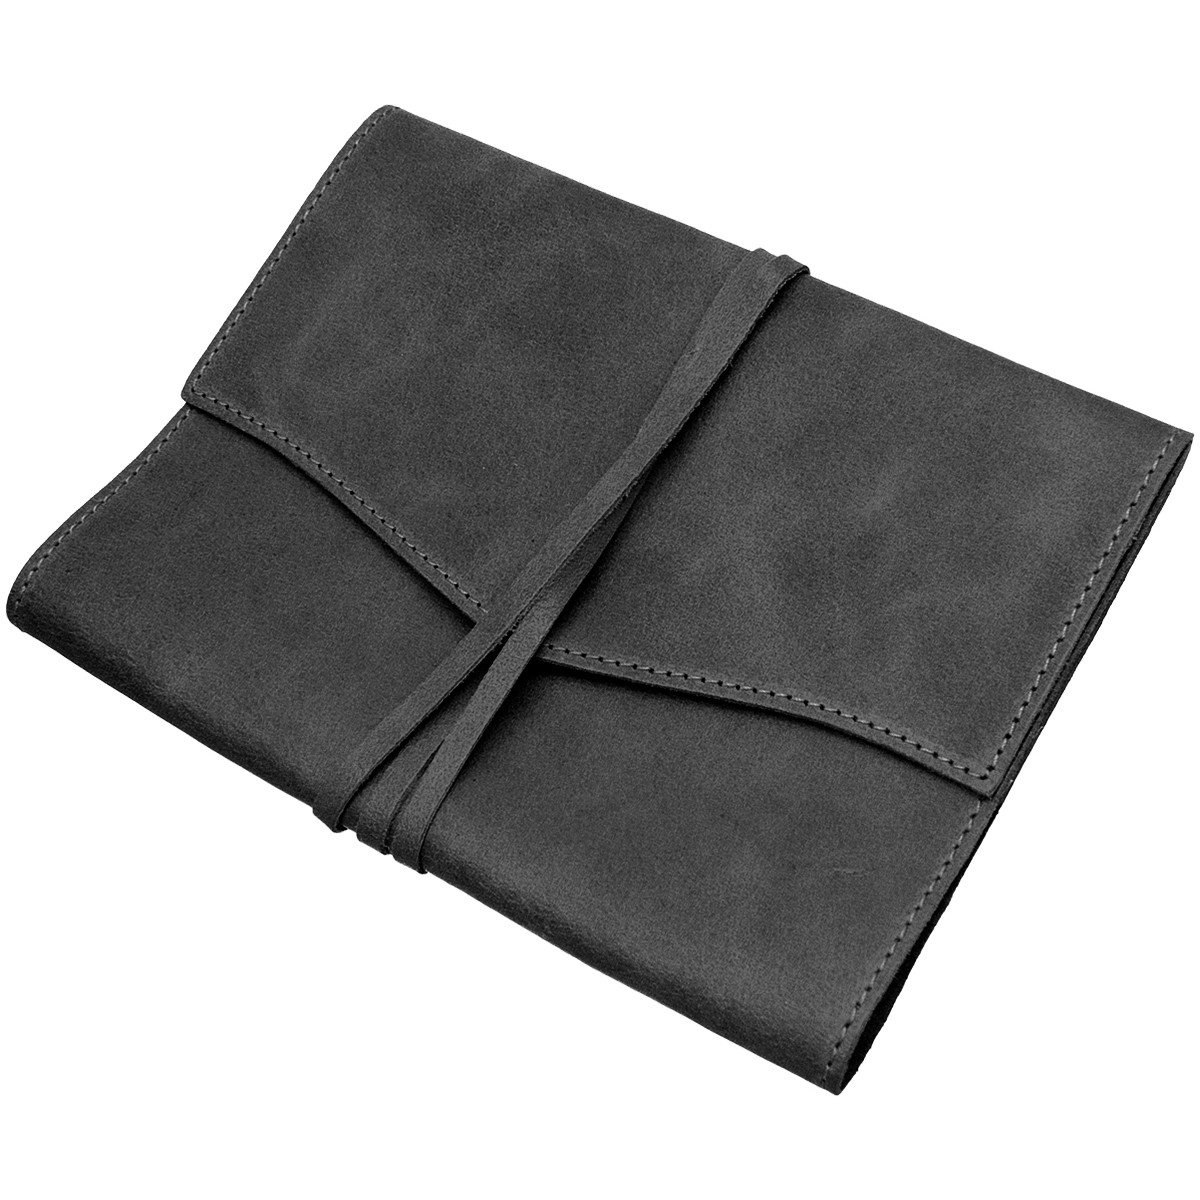 Papuro Milano Medium Refillable Journal - Black with Ruled Pages